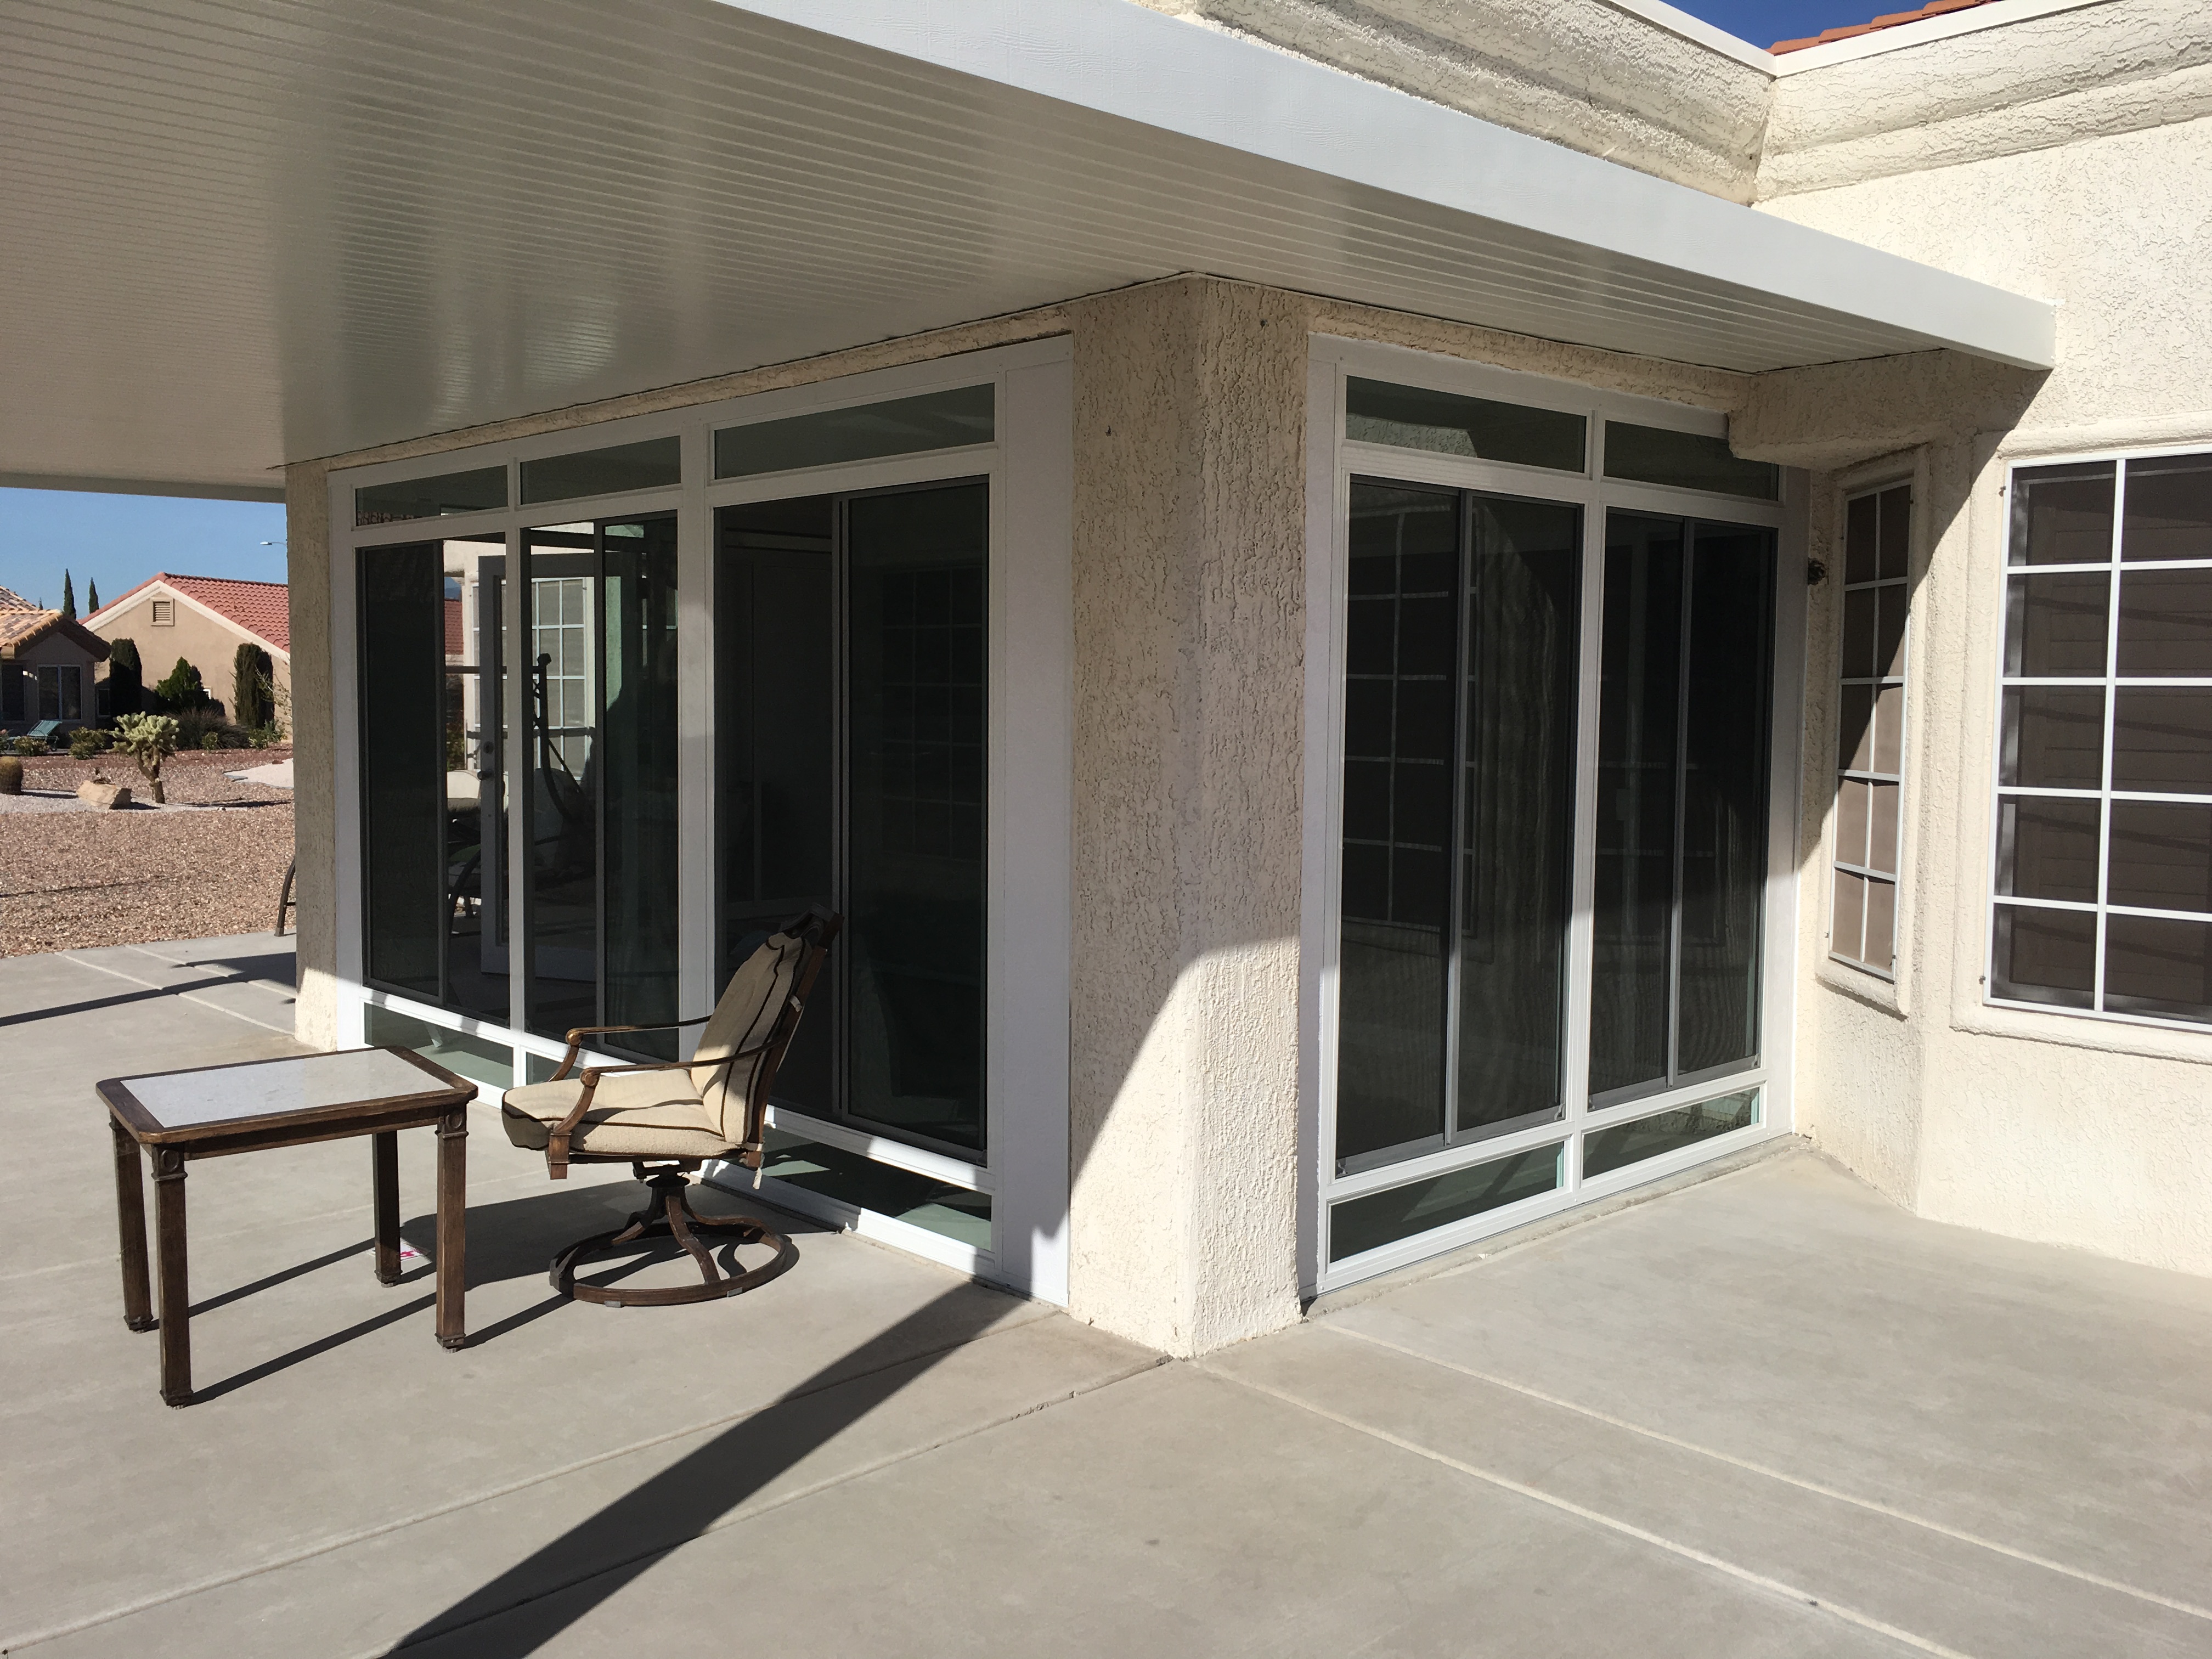 A custom sunroom with an extended roof and a stucco finish atop a poured concrete patio.